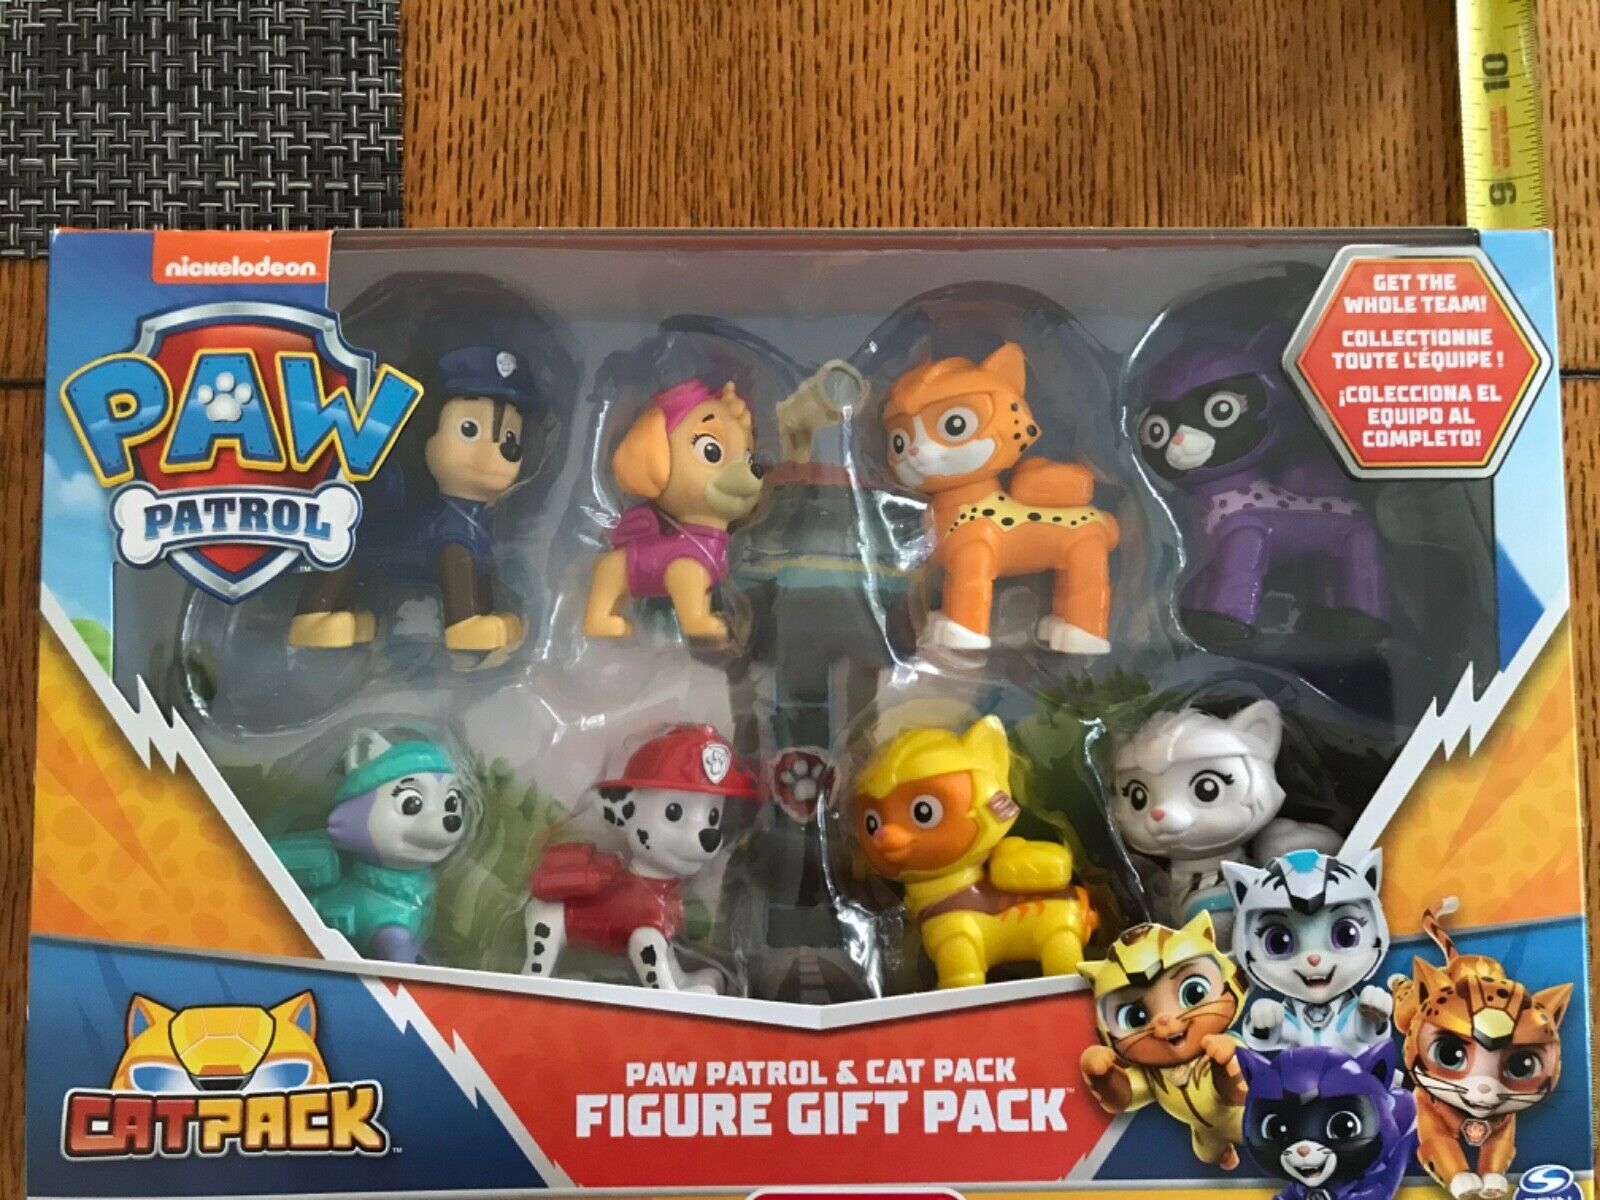 Paw Patrol & Cat Pack Gift 8 Pack Action Figure Set New